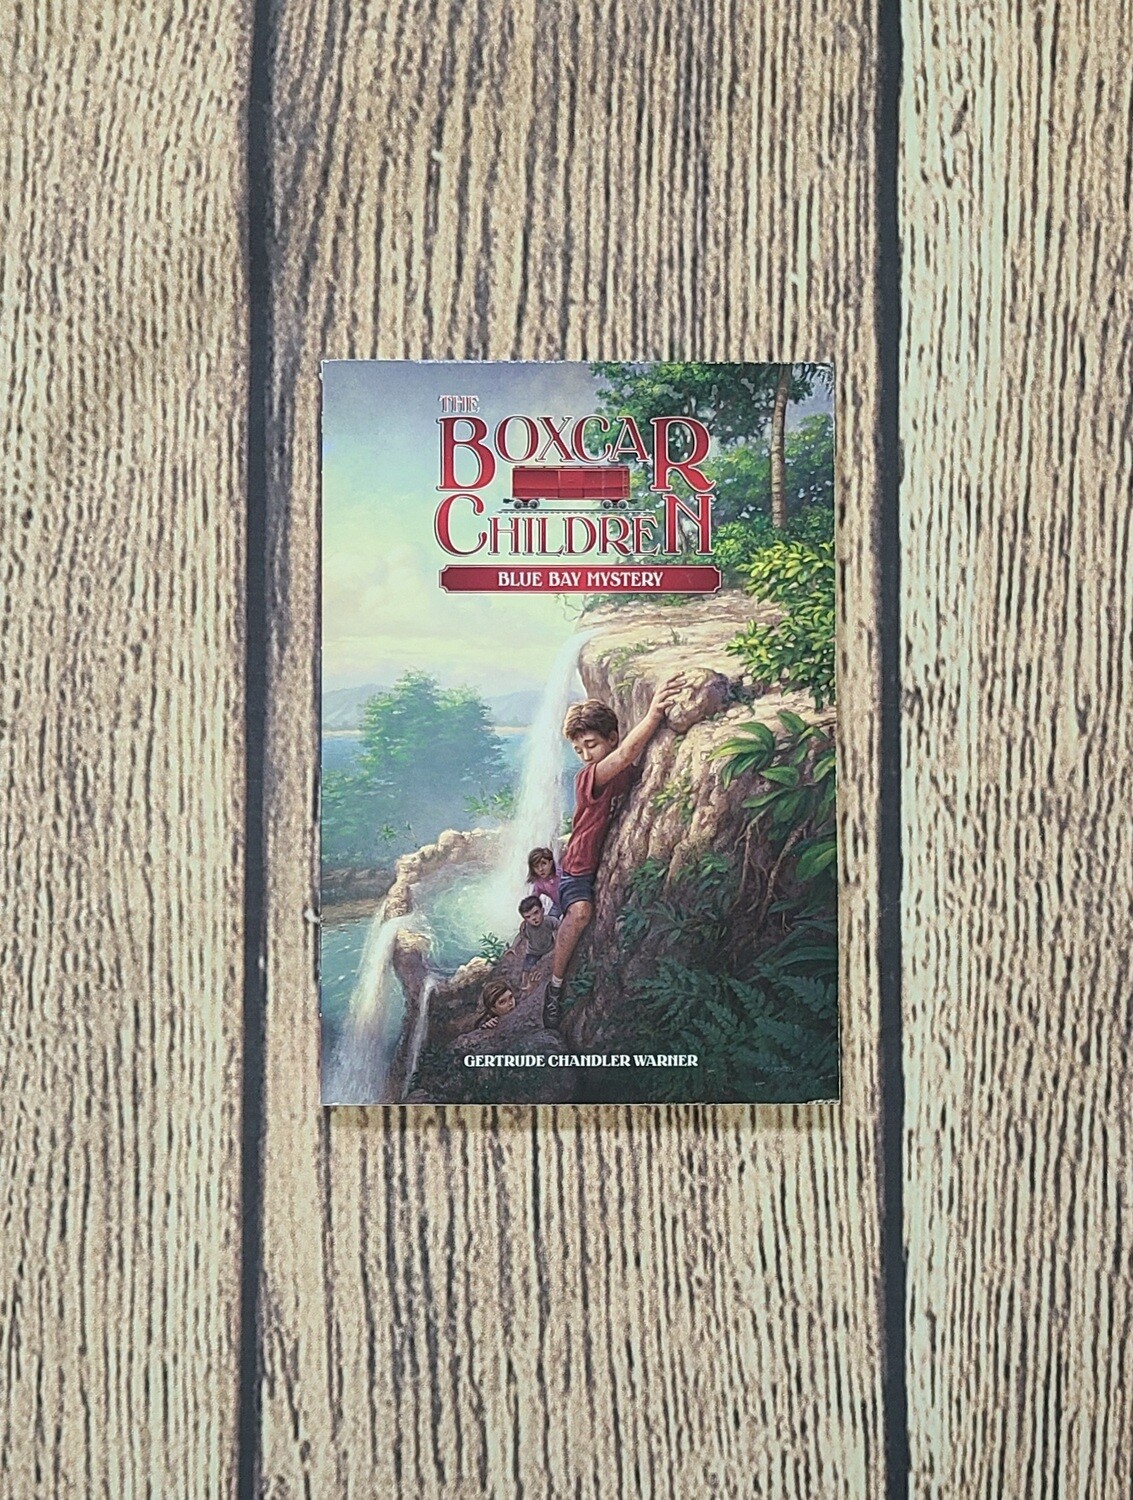 The Boxcar Children: Blue Bay Mystery by Gertrude Chandler Warner